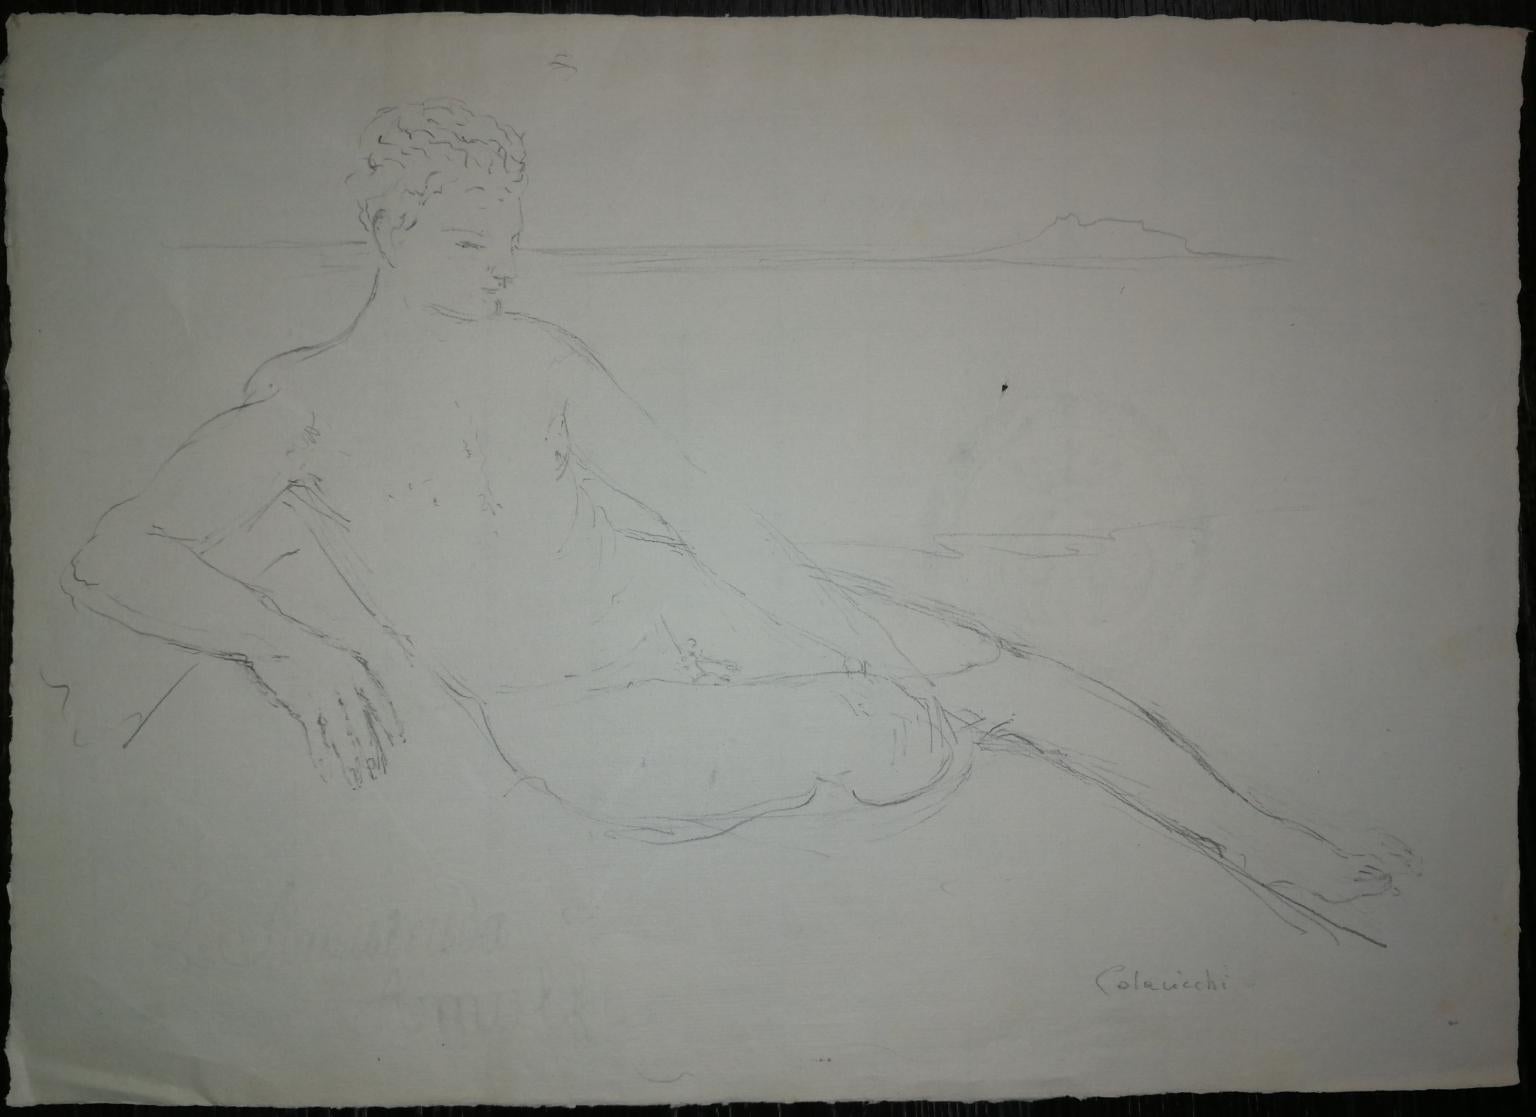 Signed Colacicchi Male Nude Drawing Mid-20 century pencil on paper  - Other Art Style Art by Giovanni Colacicchi